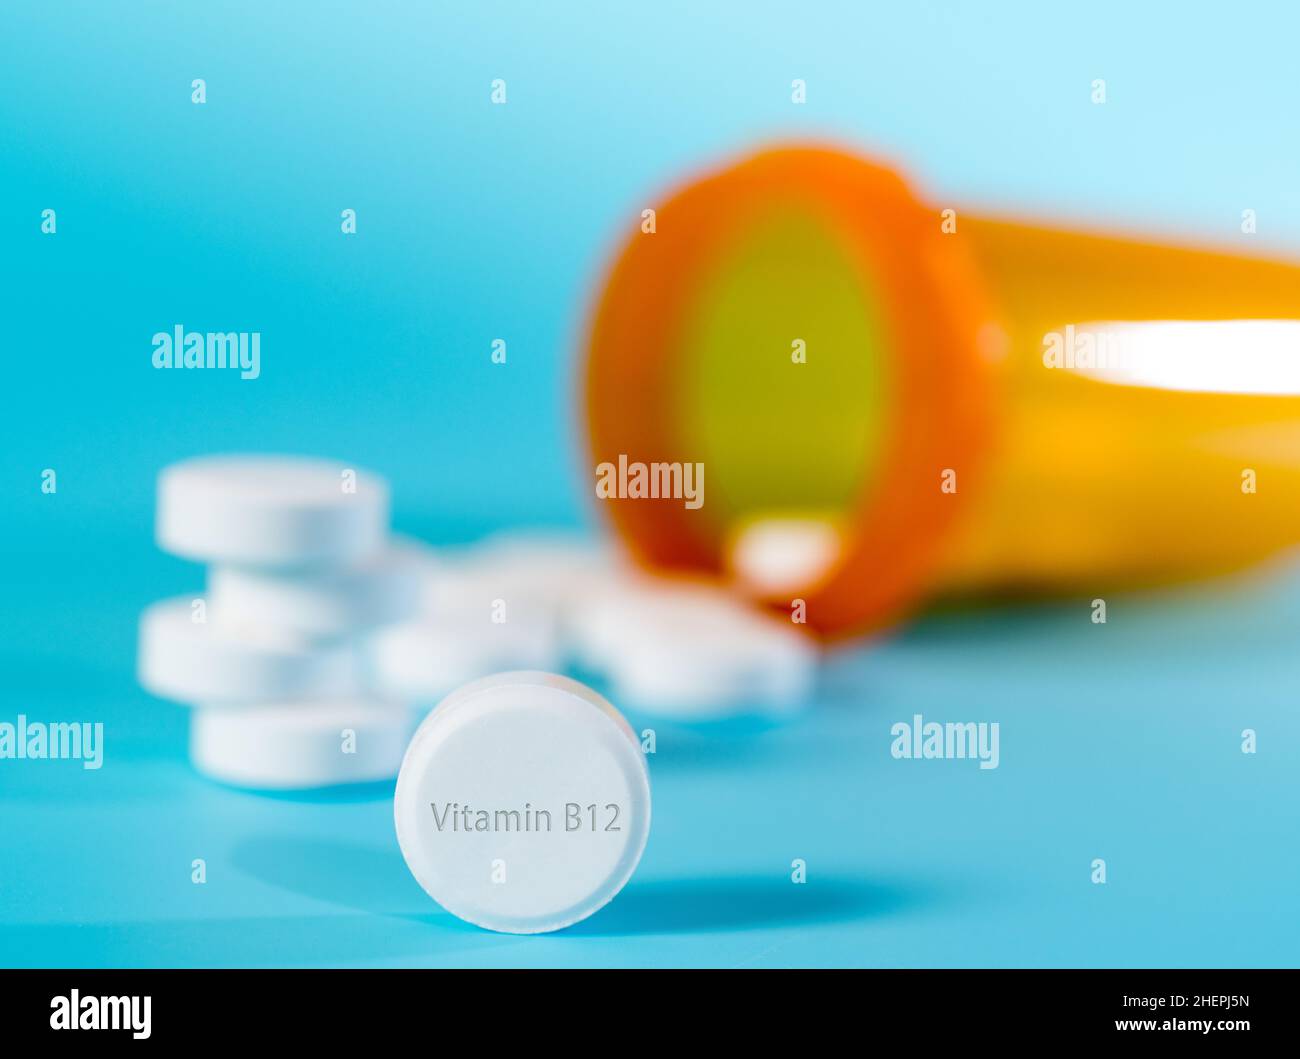 Vitamin B12 pills Vitamin B12 is a nutrient helps keep blood and nerve cells healthy and helps make DNA, the genetic material, prevent megaloblastic a Stock Photo